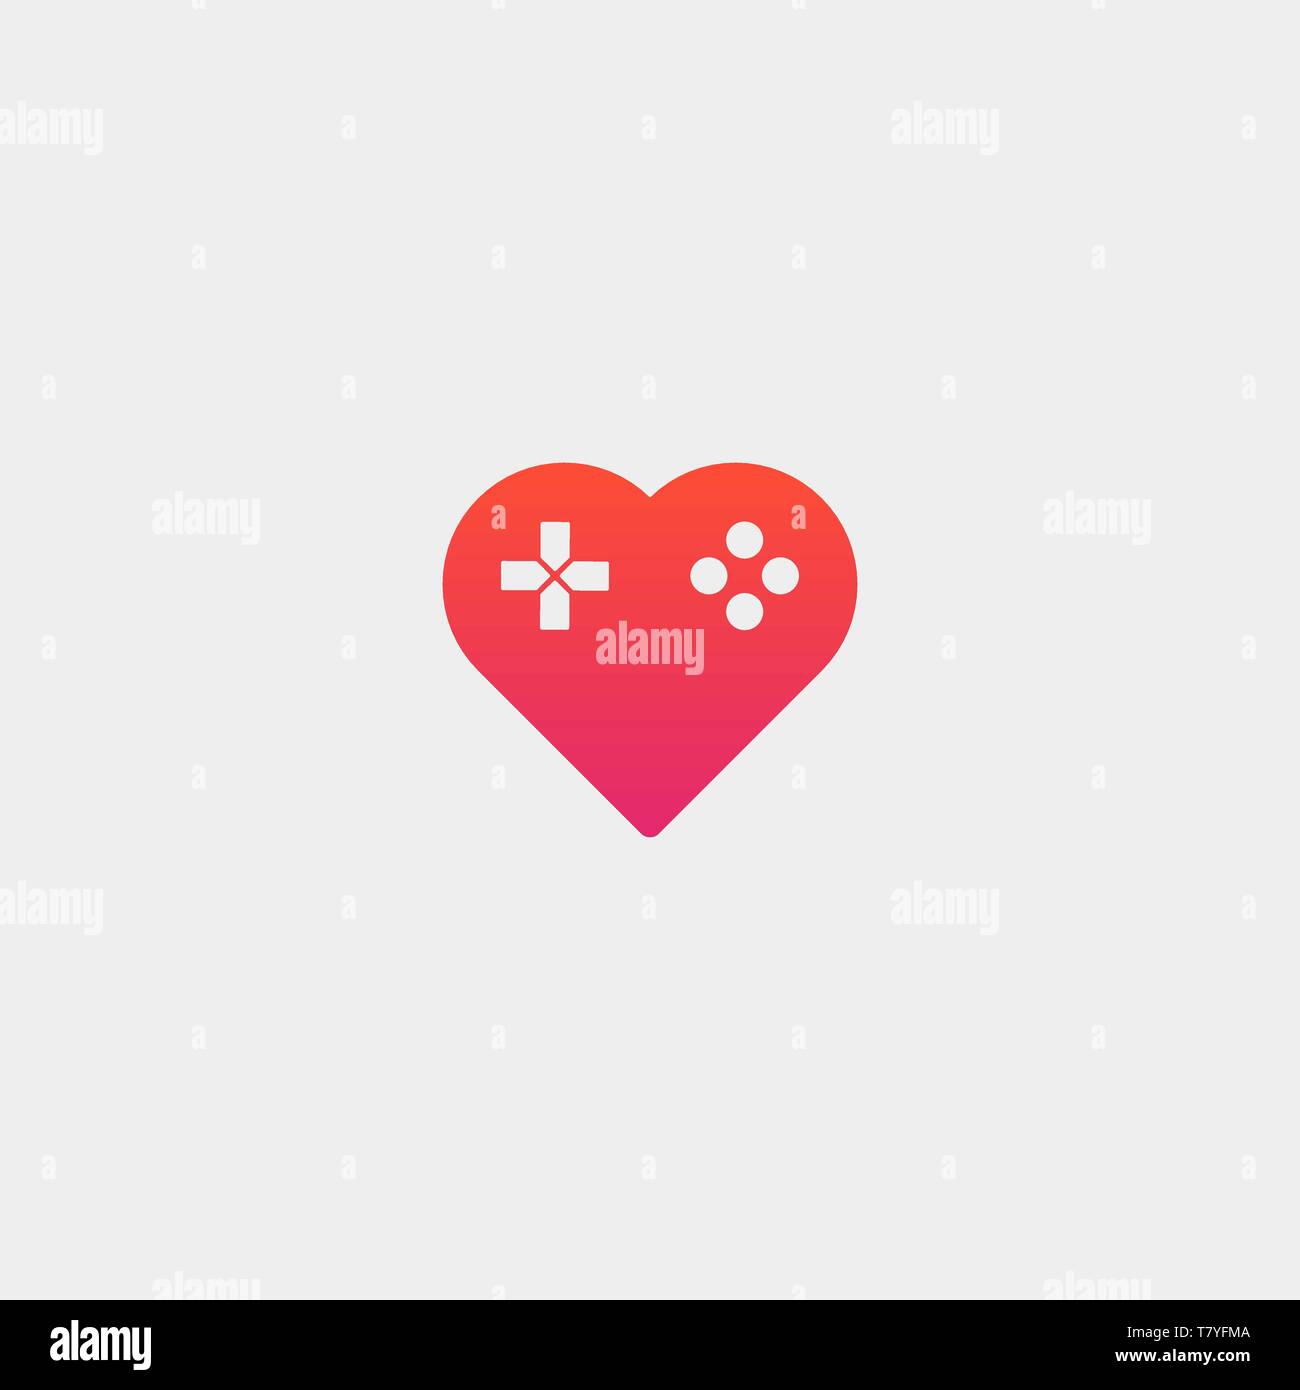 love game pad logo design template vector illustration icon element isolated Stock Vector